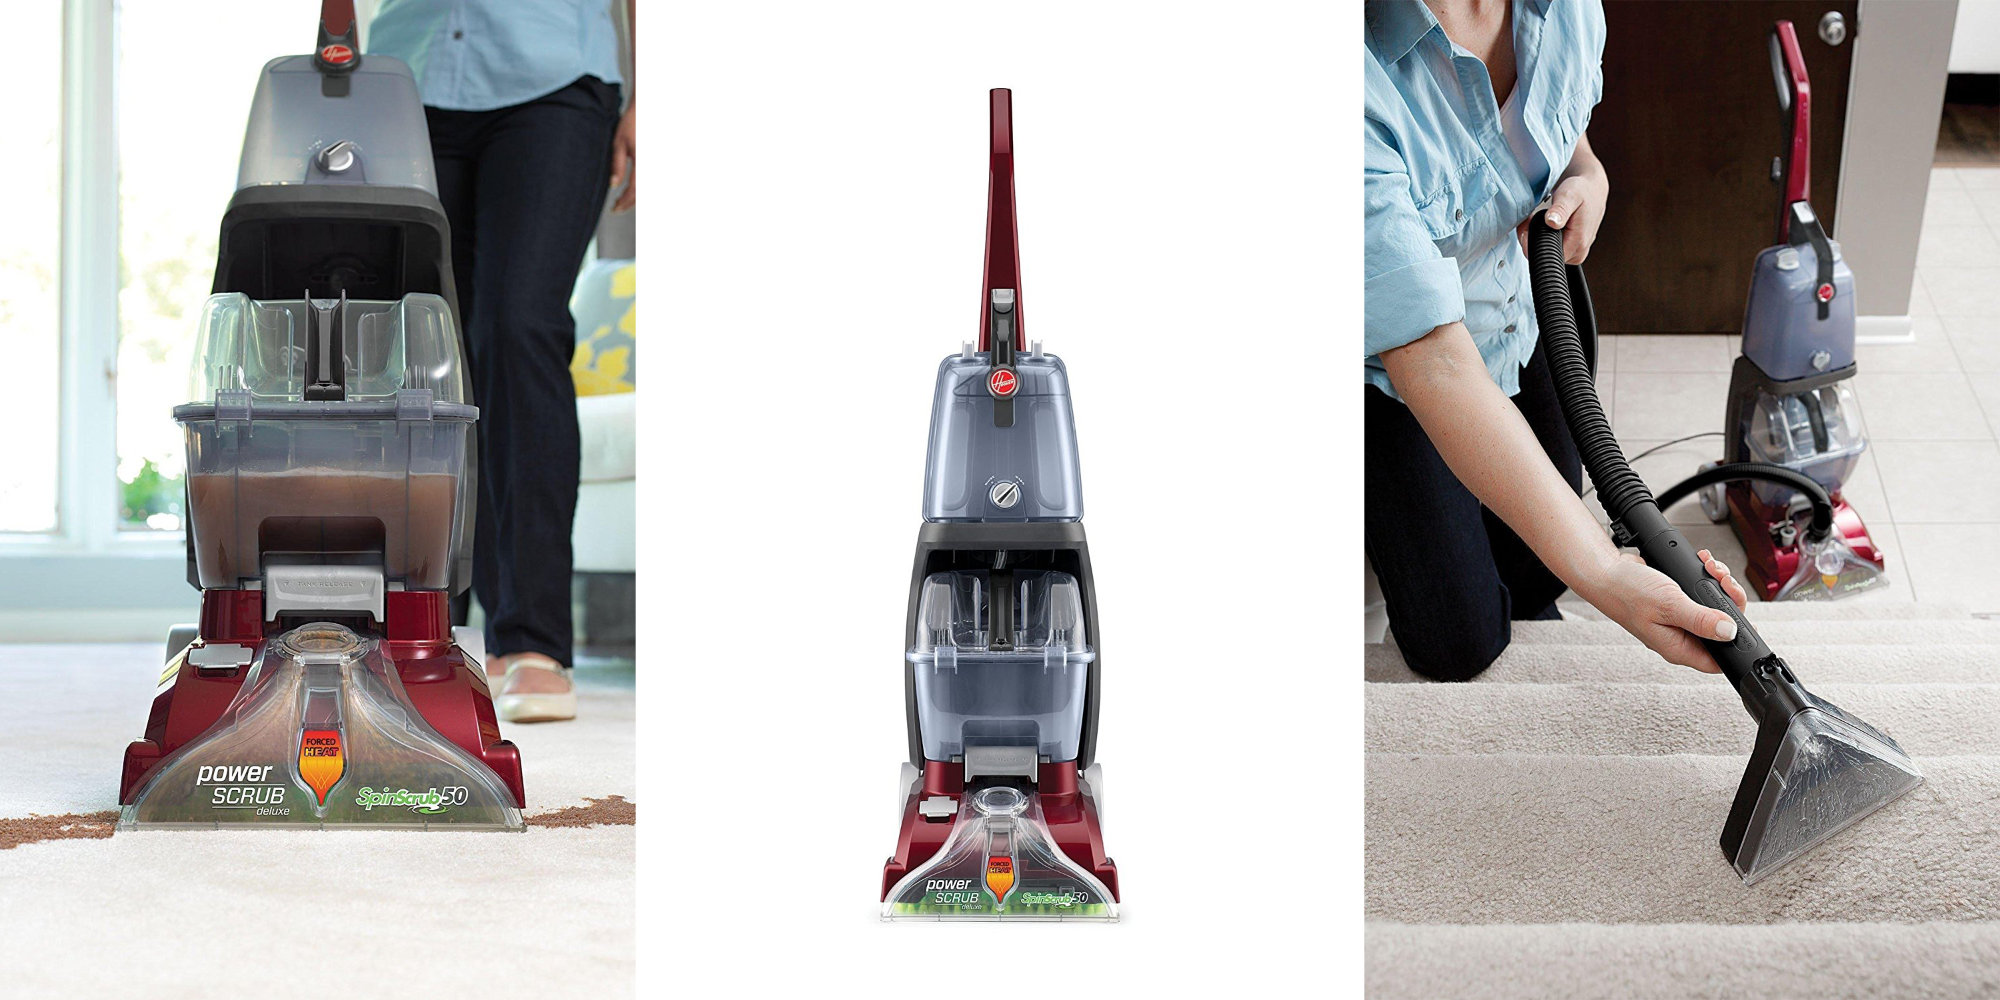 https://9to5toys.com/wp-content/uploads/sites/5/2018/08/Hoover-Power-Scrub-Deluxe-Carpet-Cleaner.jpg